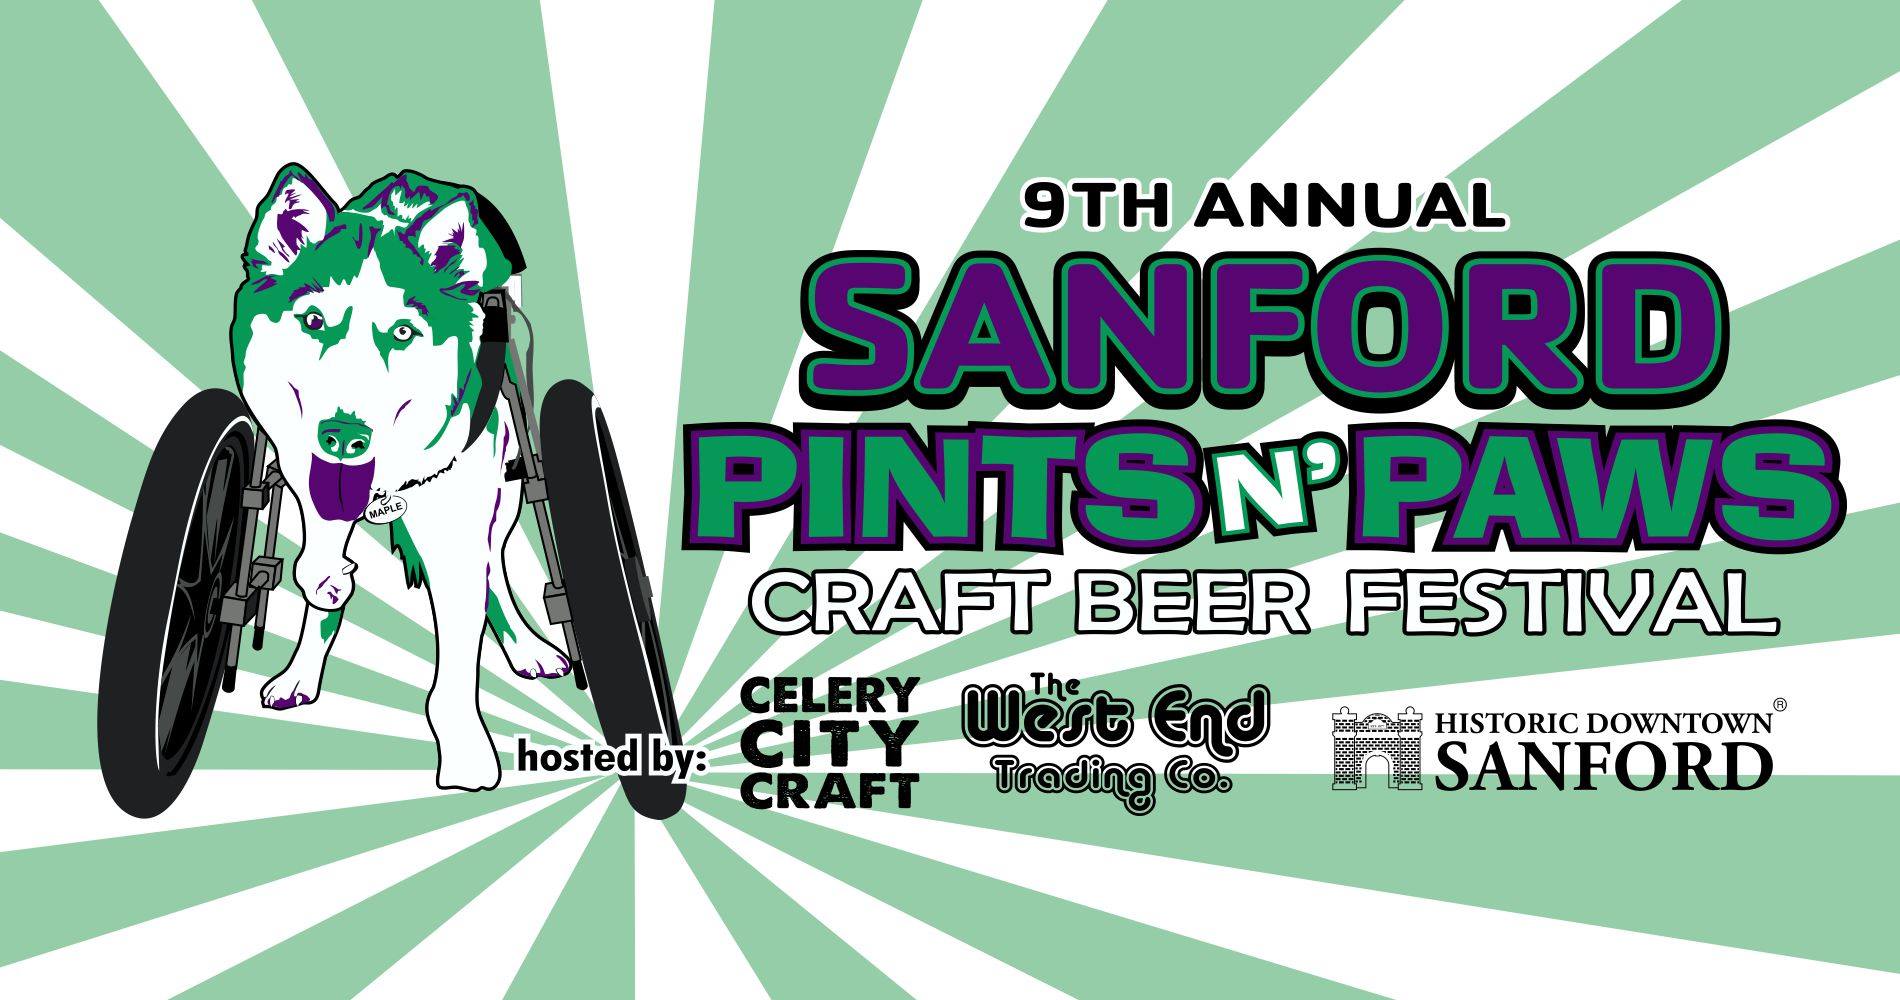 9th Annual Pints n' Paws Craft Beer Festival